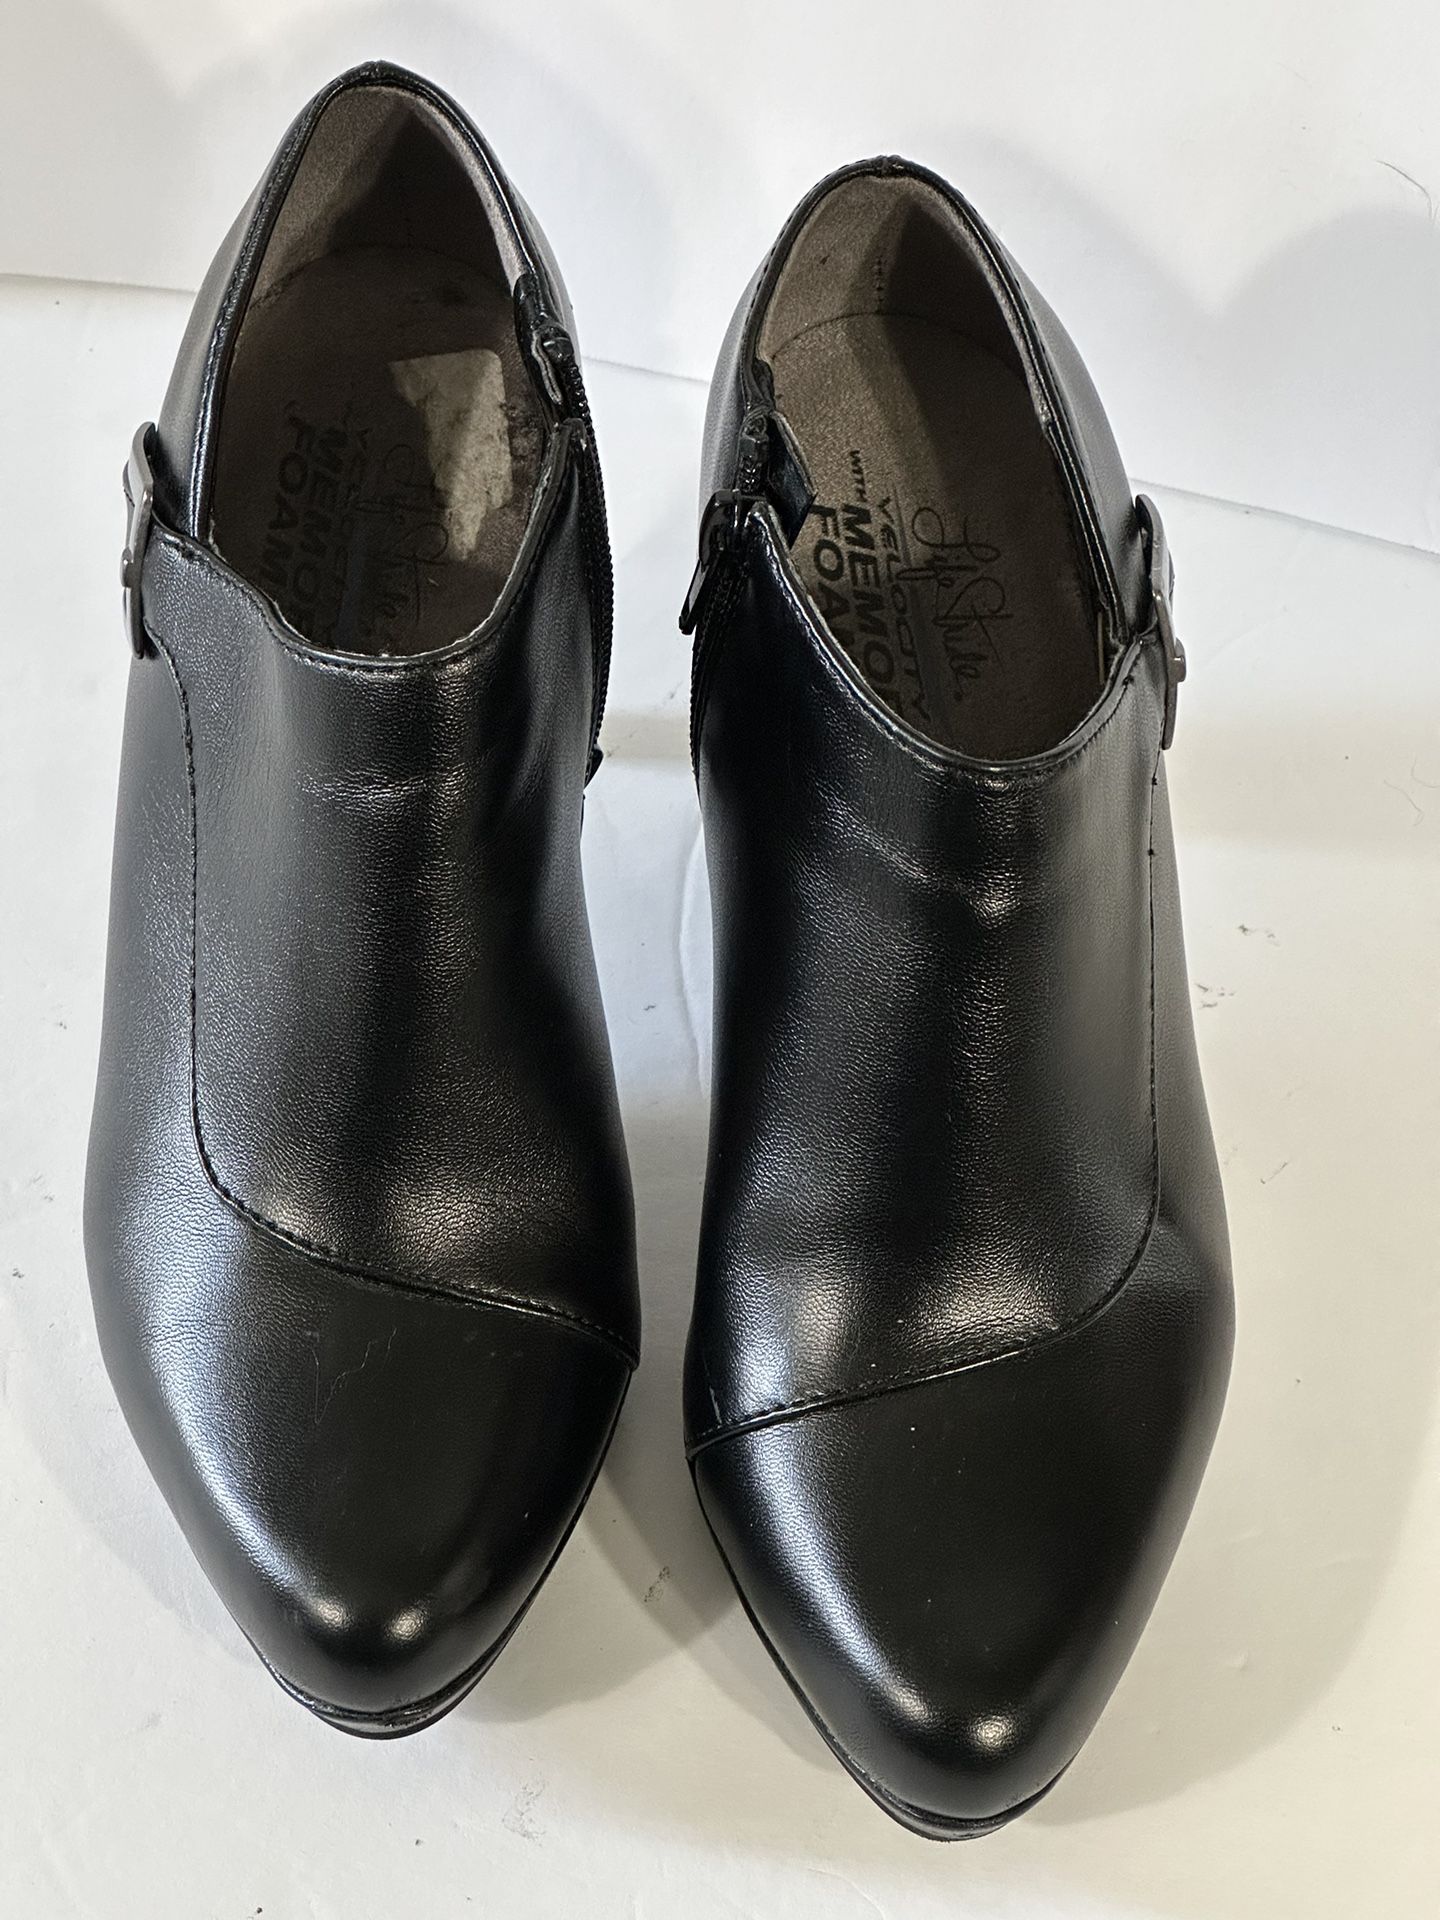 Life Stride Velocity Memory Foam Ankle Bootie’s Flexible High Heels Size 7.5 One Tiny Scratch On Heel  Great Condition 